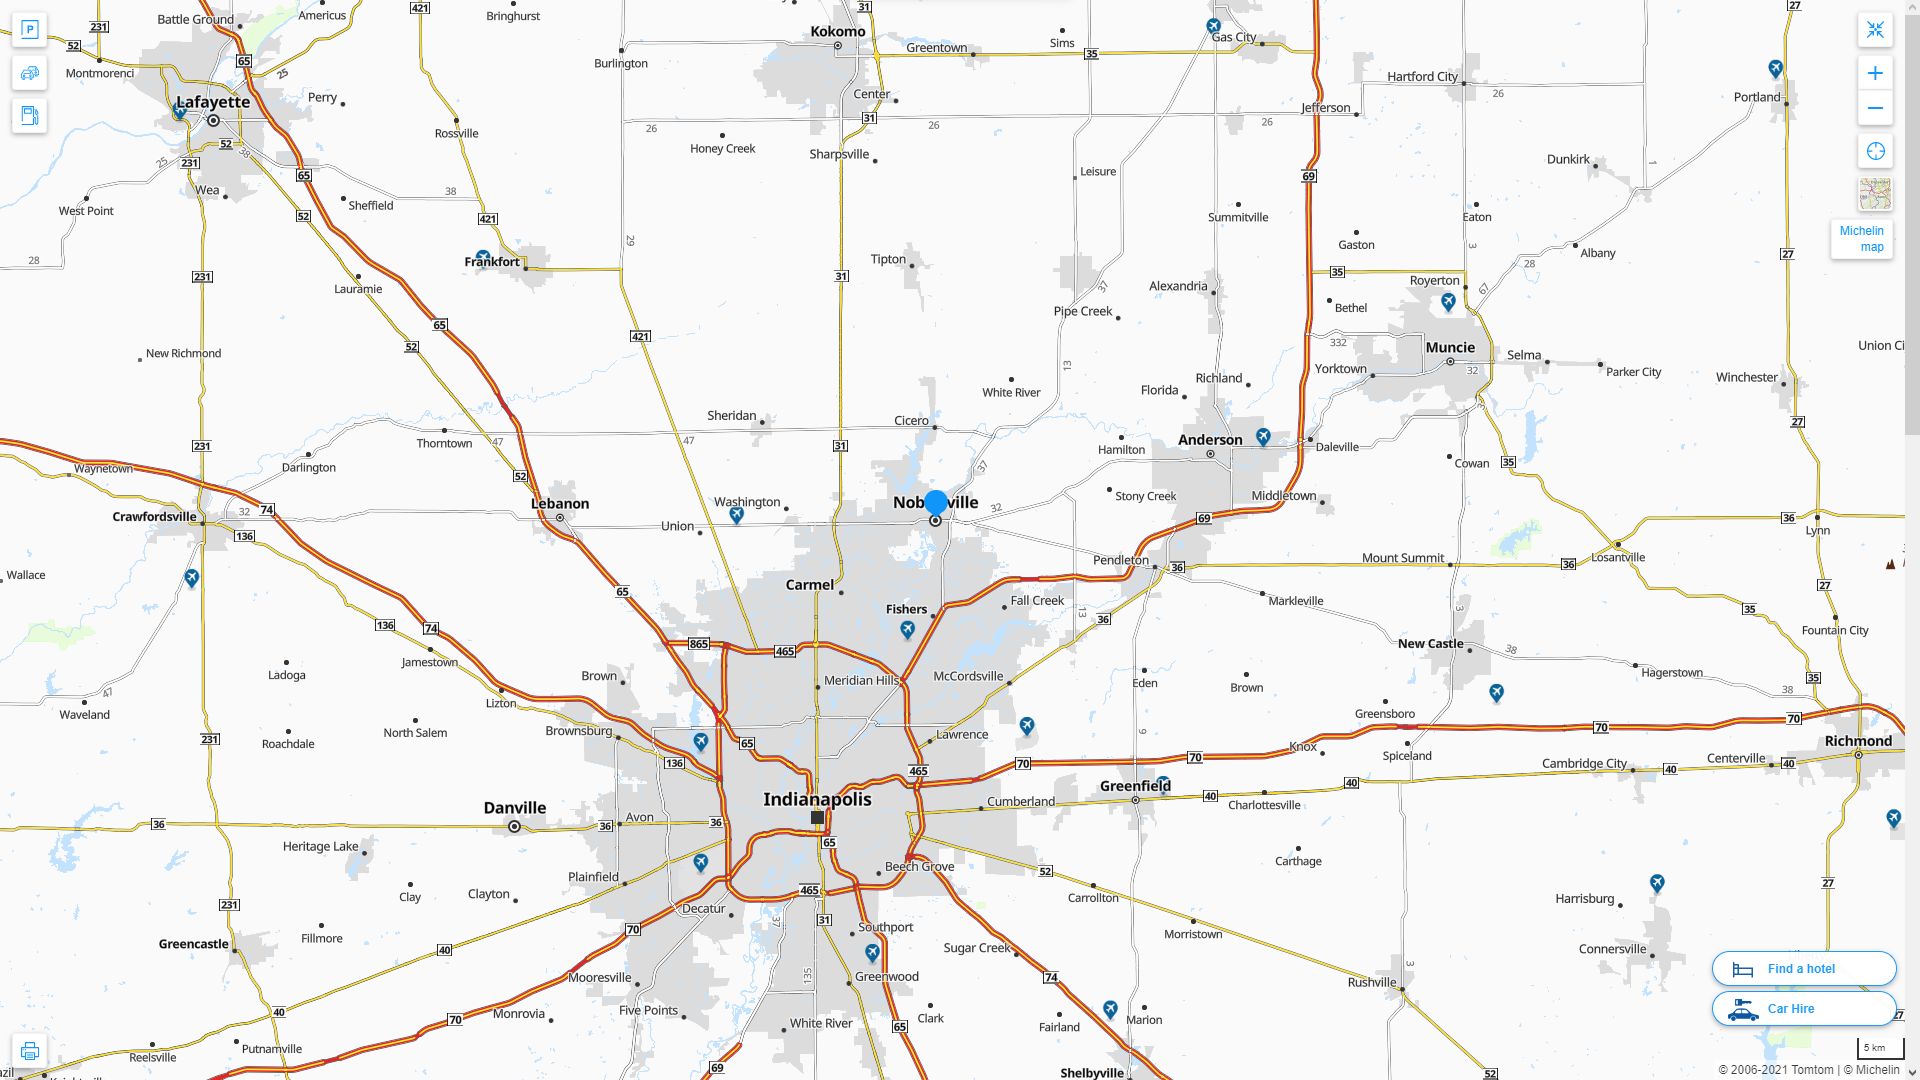 Noblesville Indiana Highway and Road Map